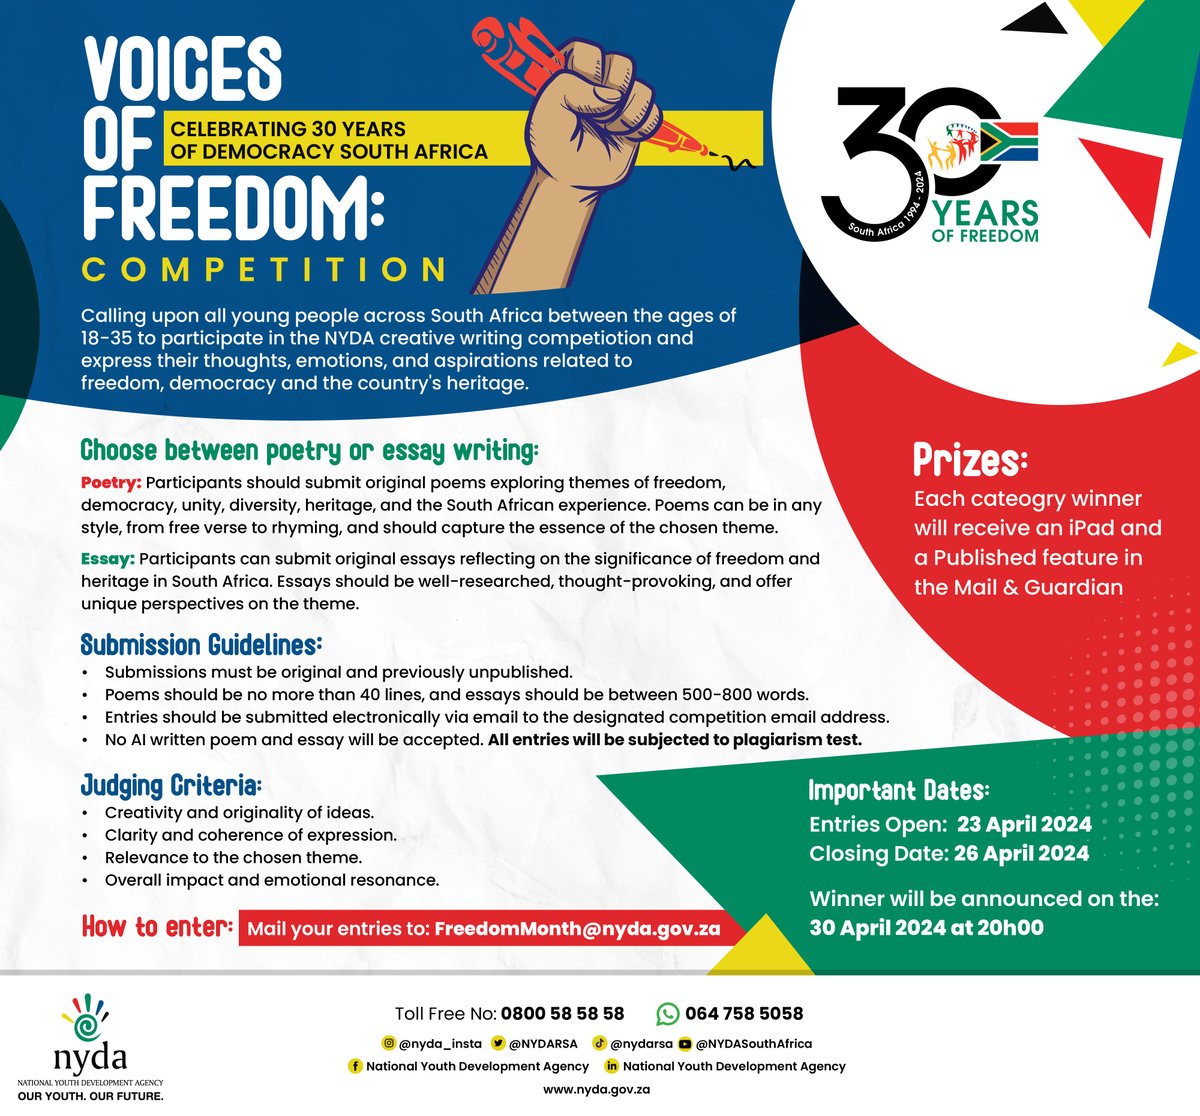 📣 Attention all young voices of South African Youth! ✍️ 🎉 Come celebrate 30 years of Democracy with us in the 'Voices of Freedom: Celebrating 30 years of Democracy in South Africa' competition! Express your thoughts on freedom, democracy, and our vibrant heritage through